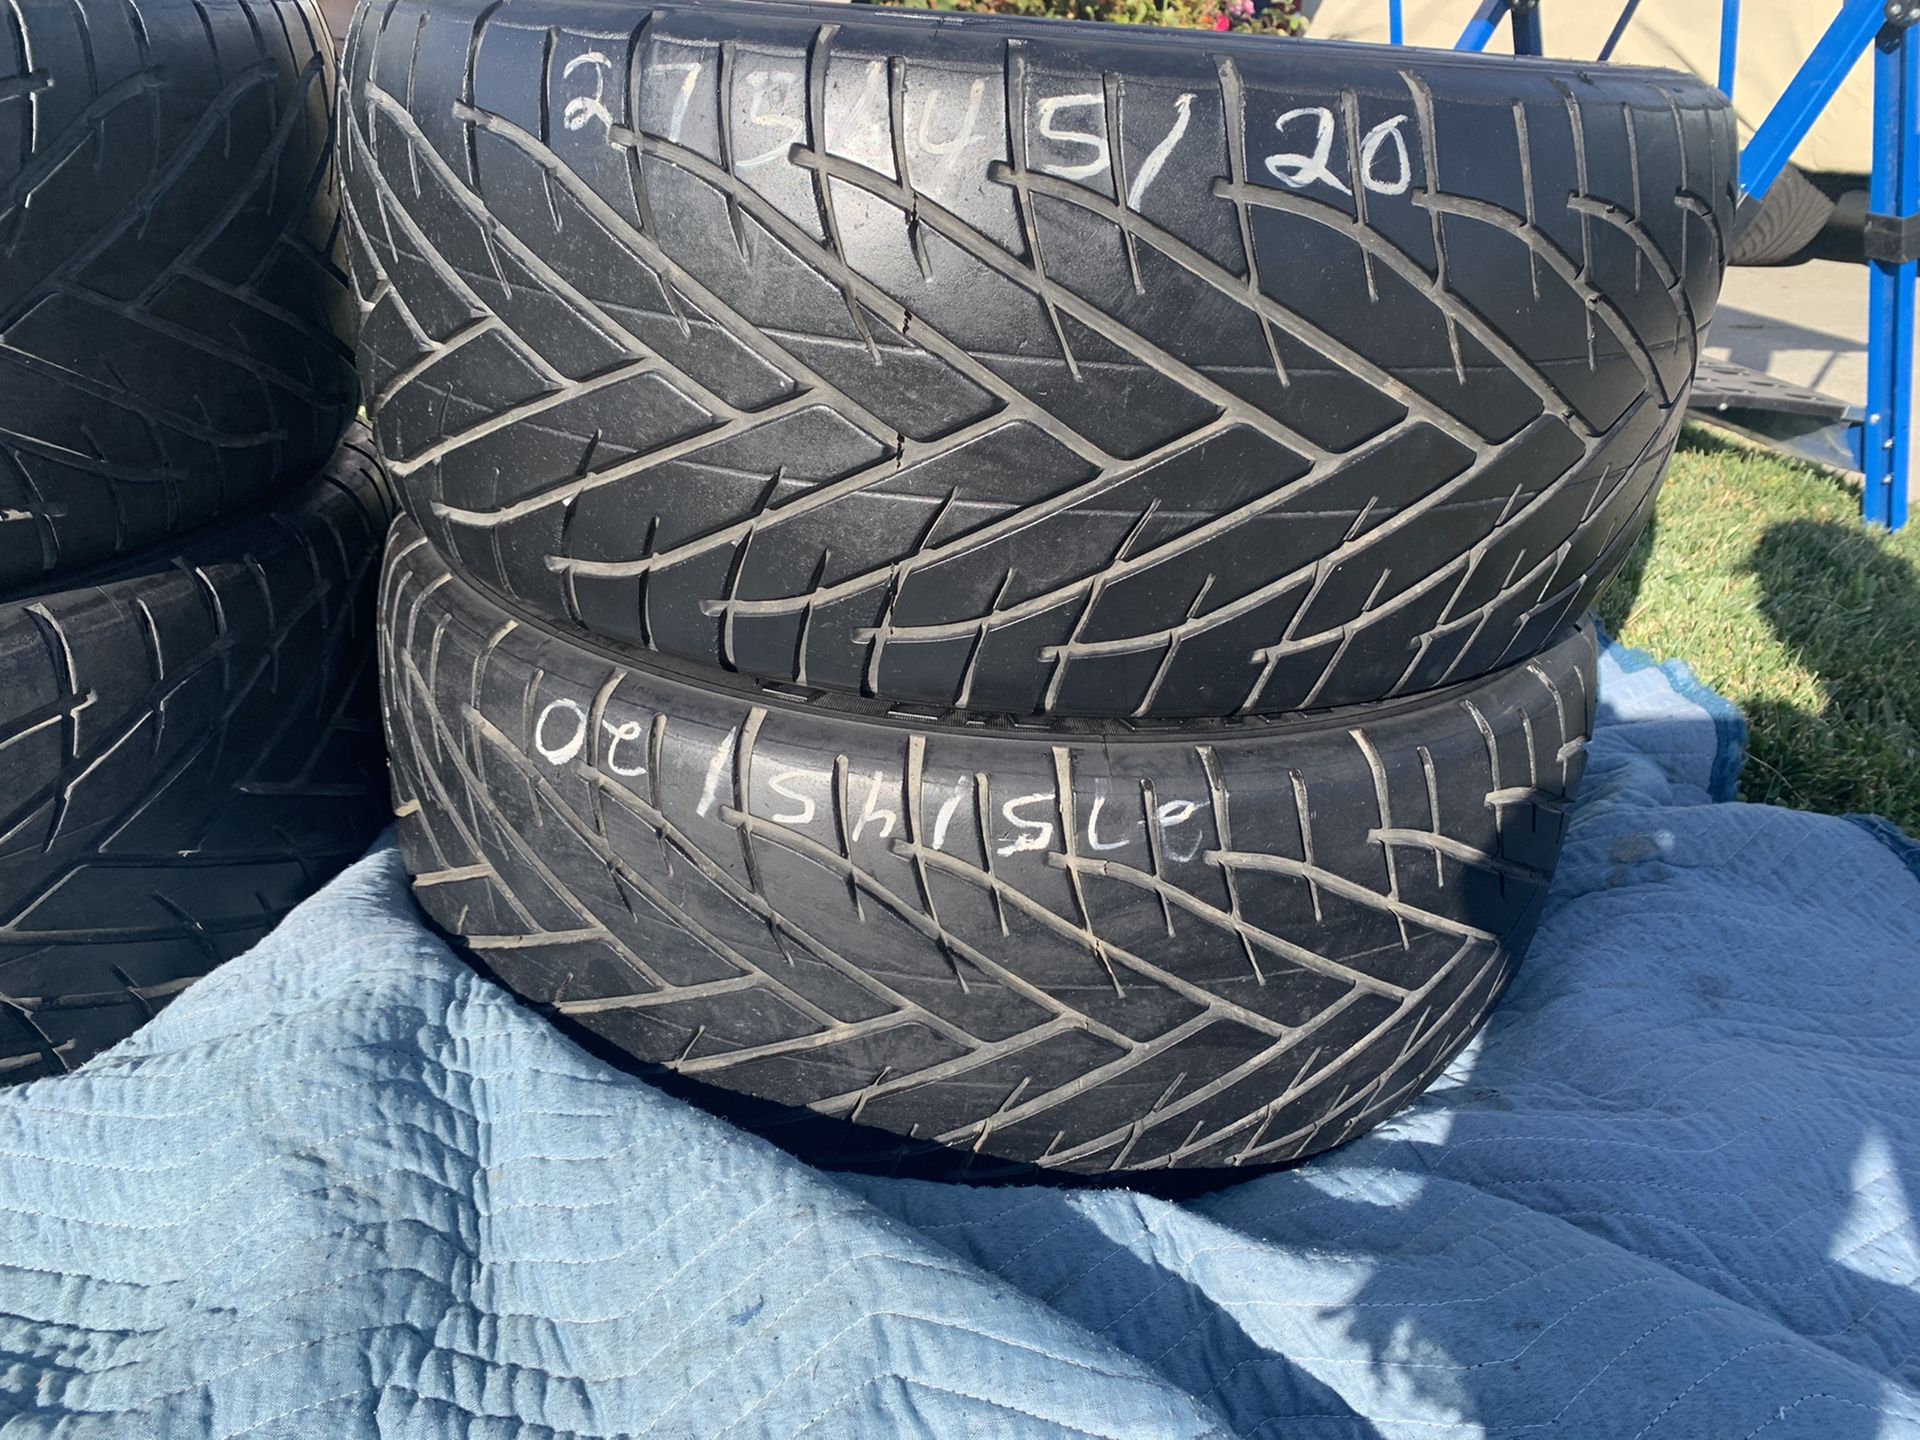 275/45/20 ( 2 tires only ) in Great Condition